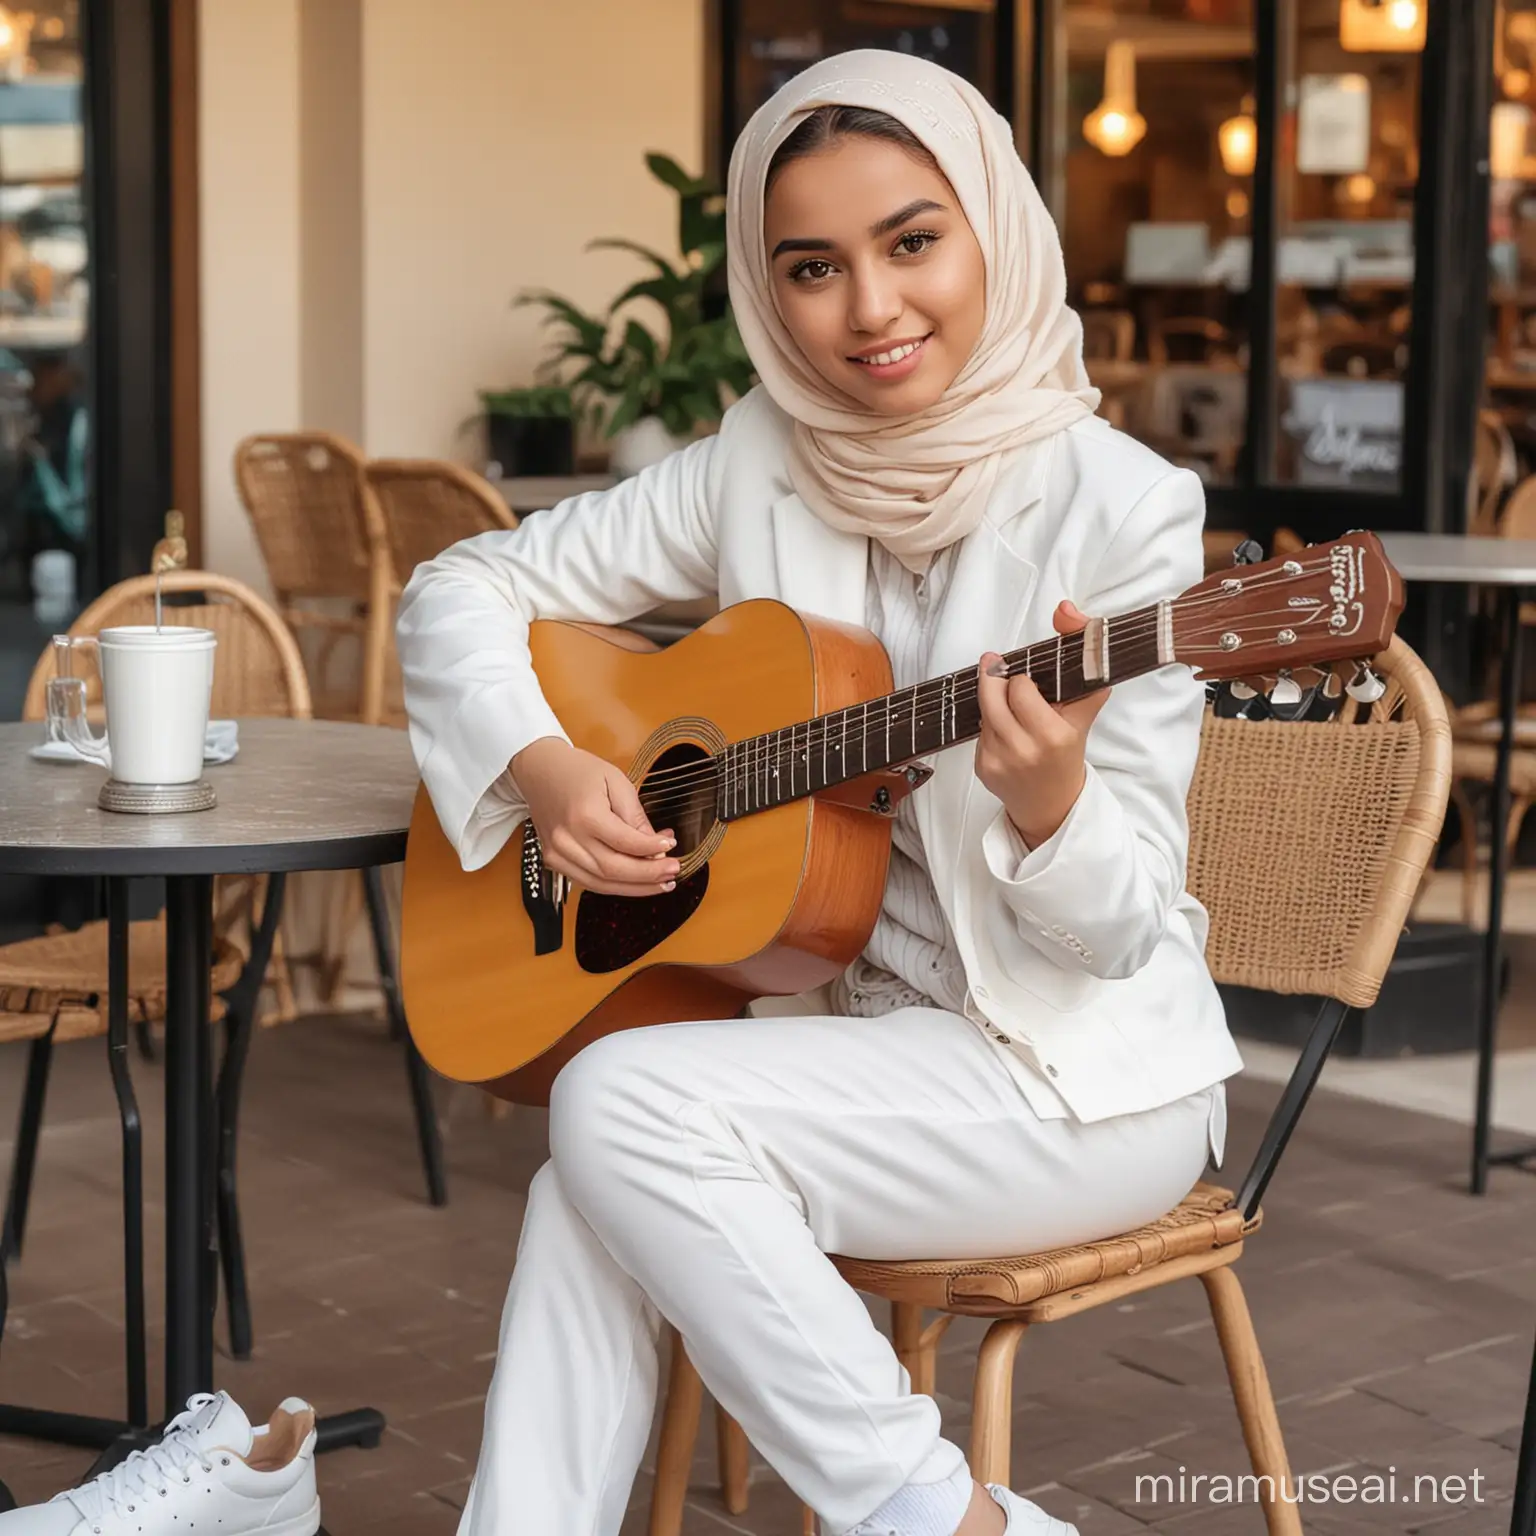 Muslim Girl Named Anna Playing Guitar in Cafe